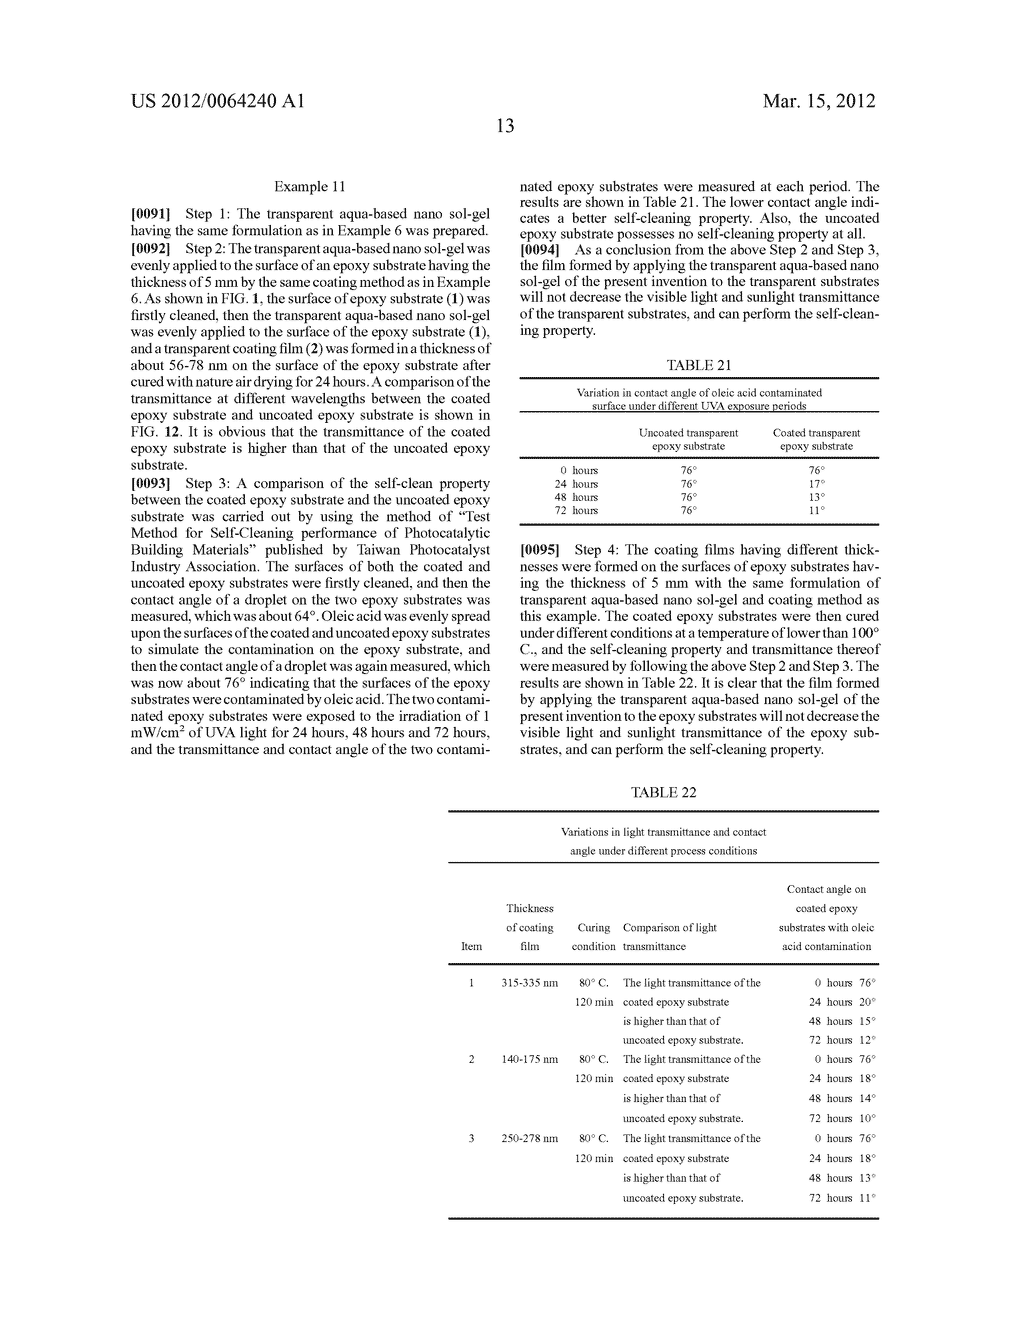 TRANSPARENT AQUA-BASED NANO SOL-GEL COMPOSITION AND METHOD OF APPLYING THE     SAME - diagram, schematic, and image 20